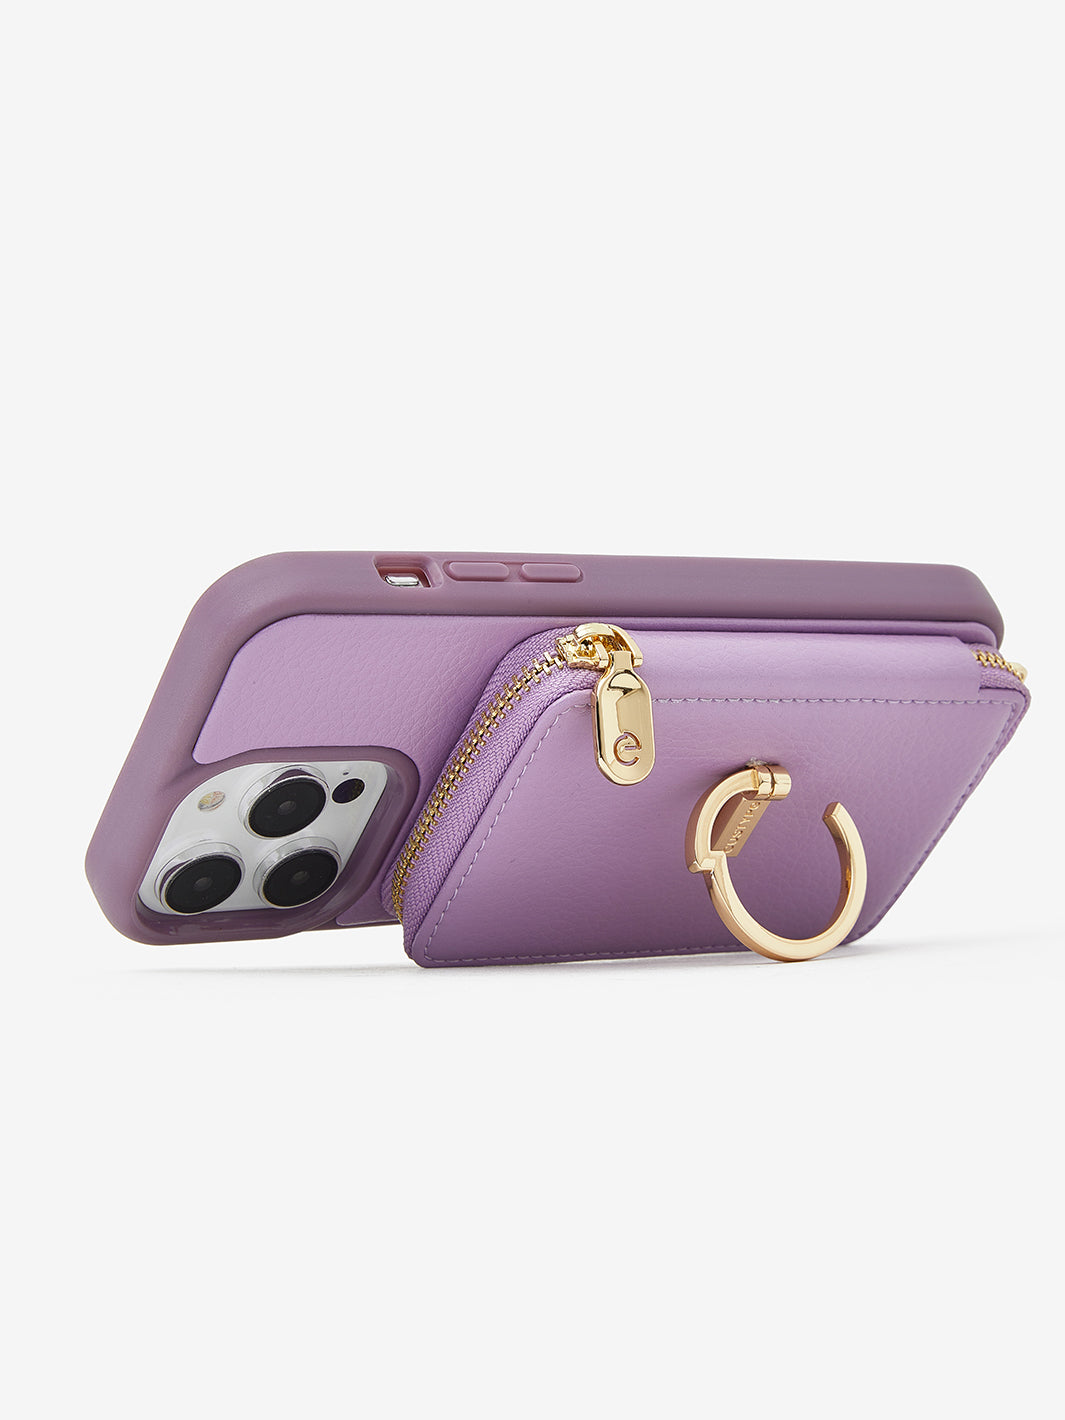 Elegant Kit- E Stand Phone Case Round Pouch Set in Purple